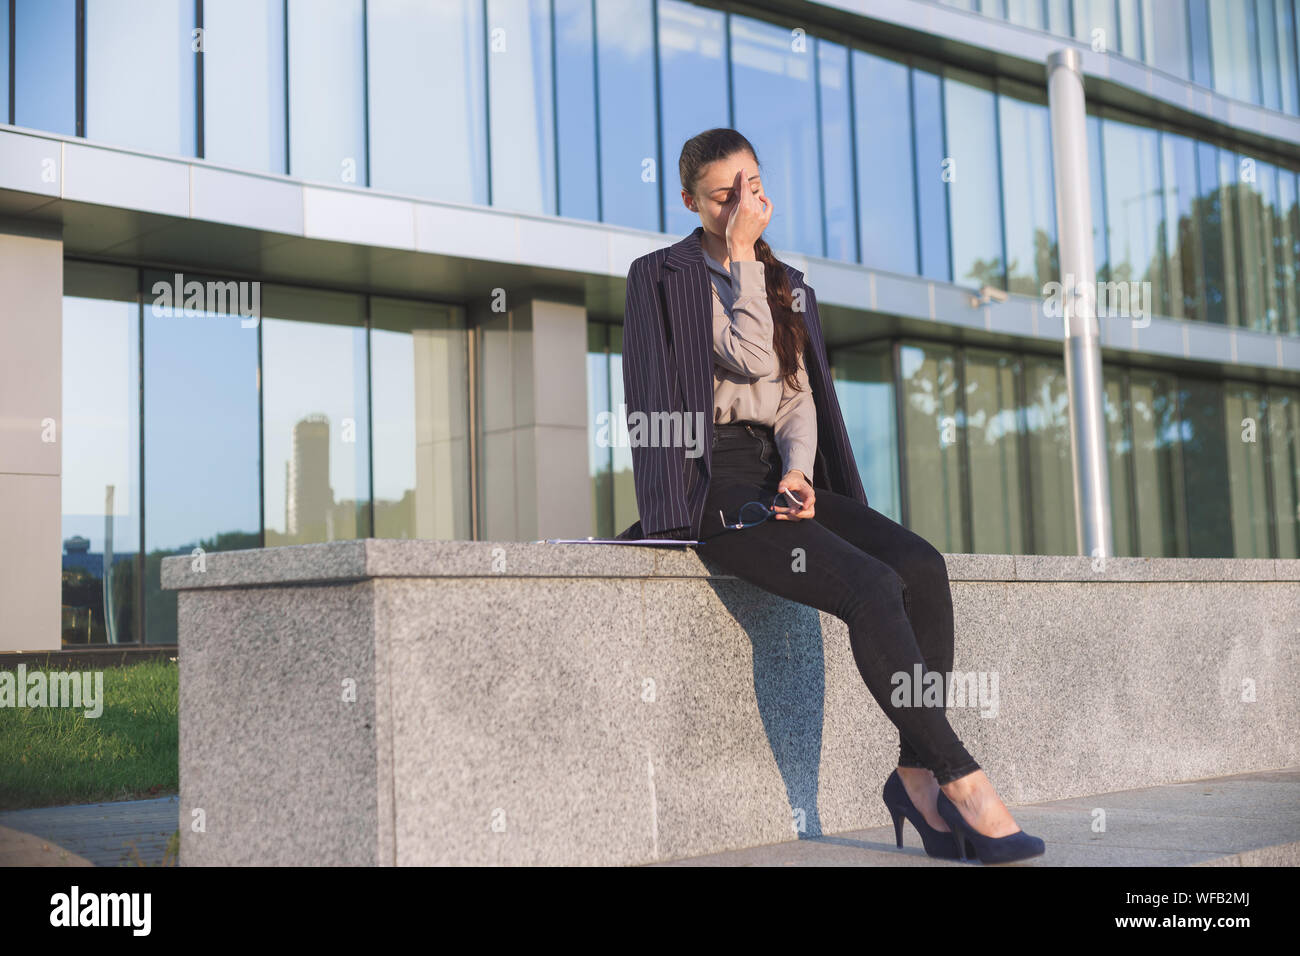 Young woman in suit suffer from stressful work. Stock Photo